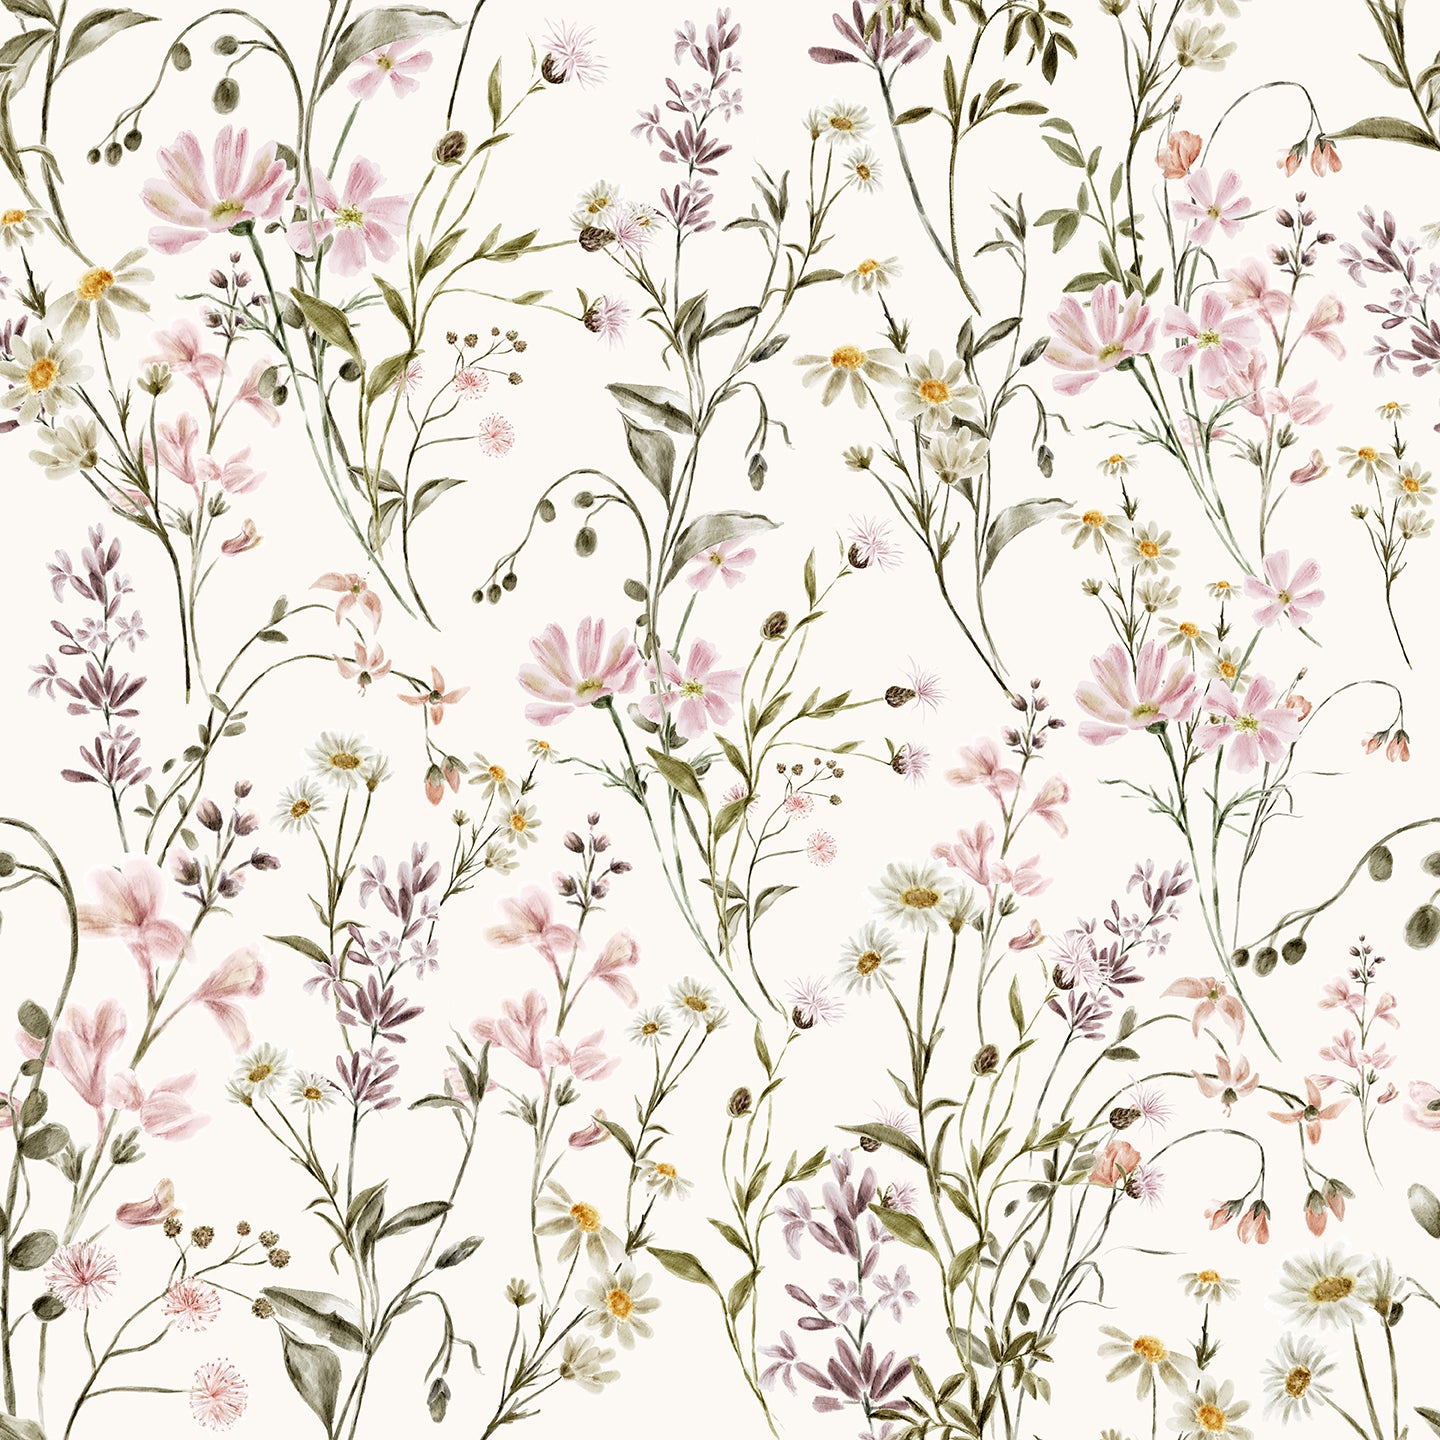 The "WildFloral Wallpaper - 75"" features a lush array of hand-painted wildflowers in soft pinks, purples, and yellows with verdant green foliage. The background is a pale, neutral tone that enhances the vibrant, watercolor aesthetic of the florals.